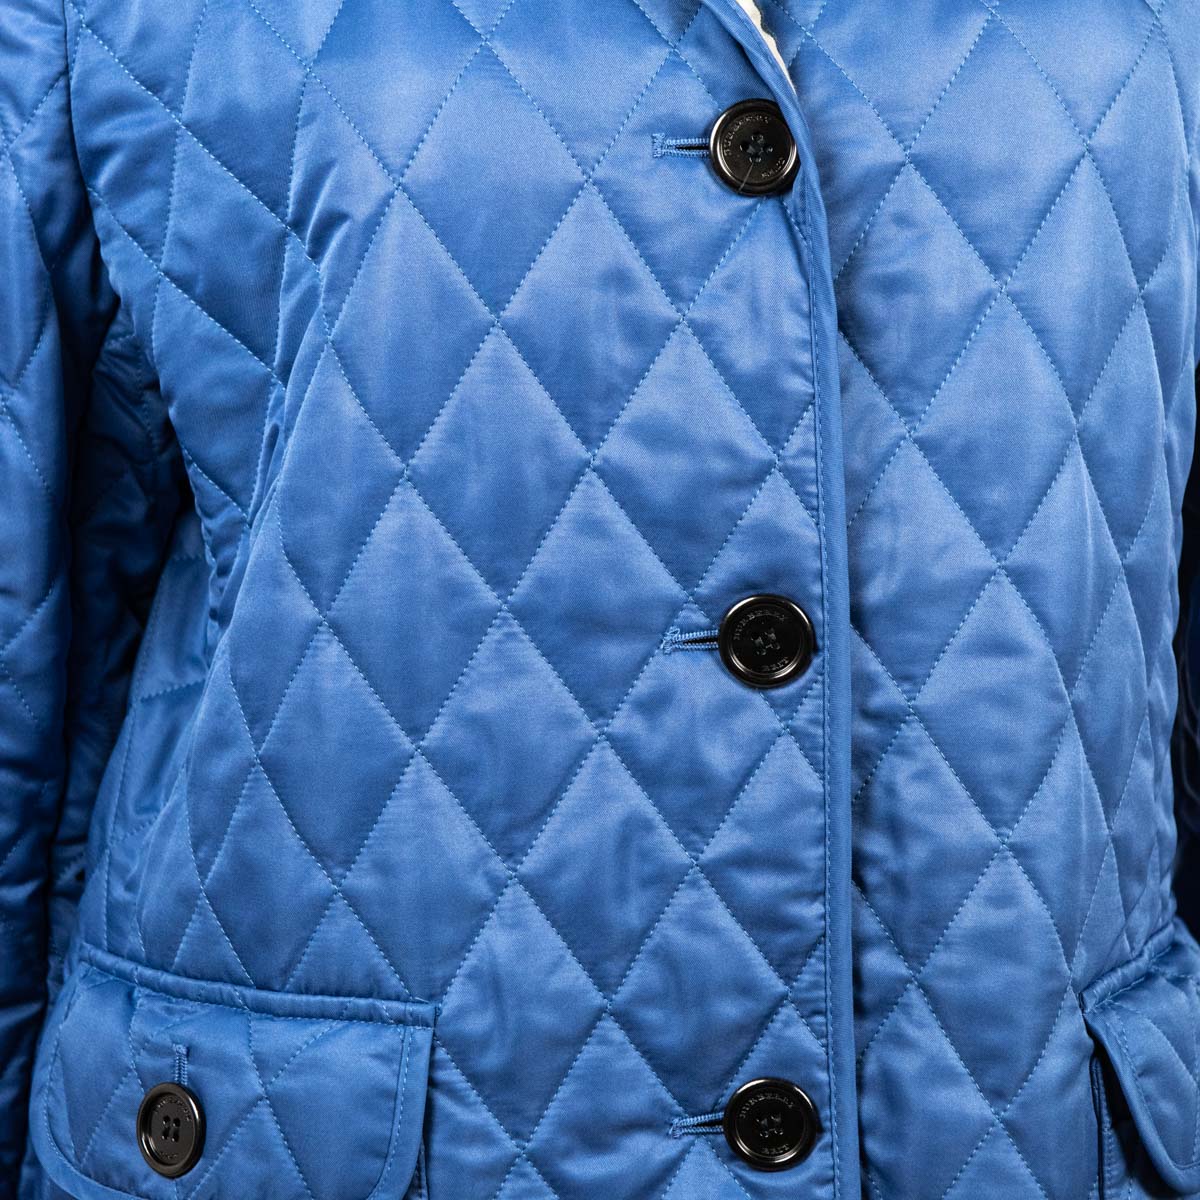 Burberry Brit Blue Quilted Jacket - Secondhand Burberry Jackets Canada